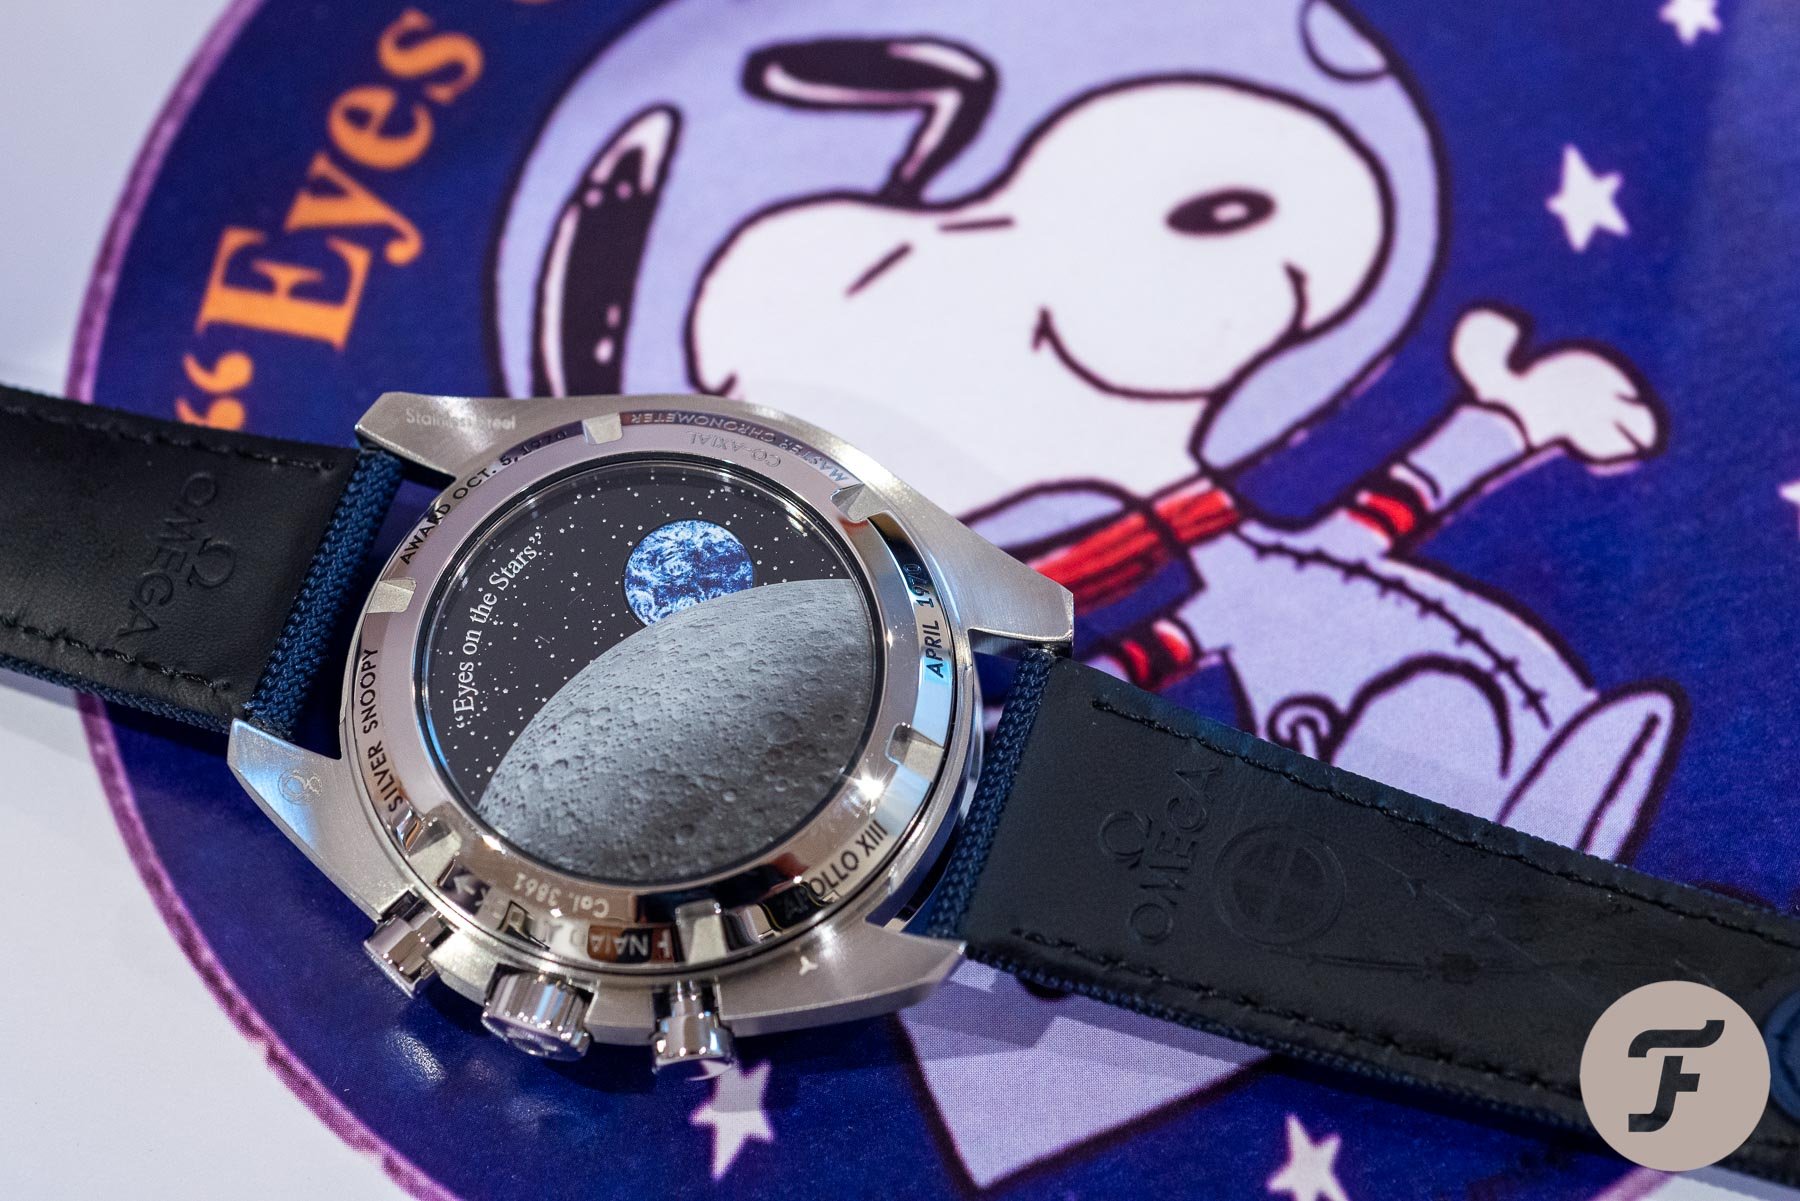 The Omega Snoopy Speedmaster Watches - Bob's Watches